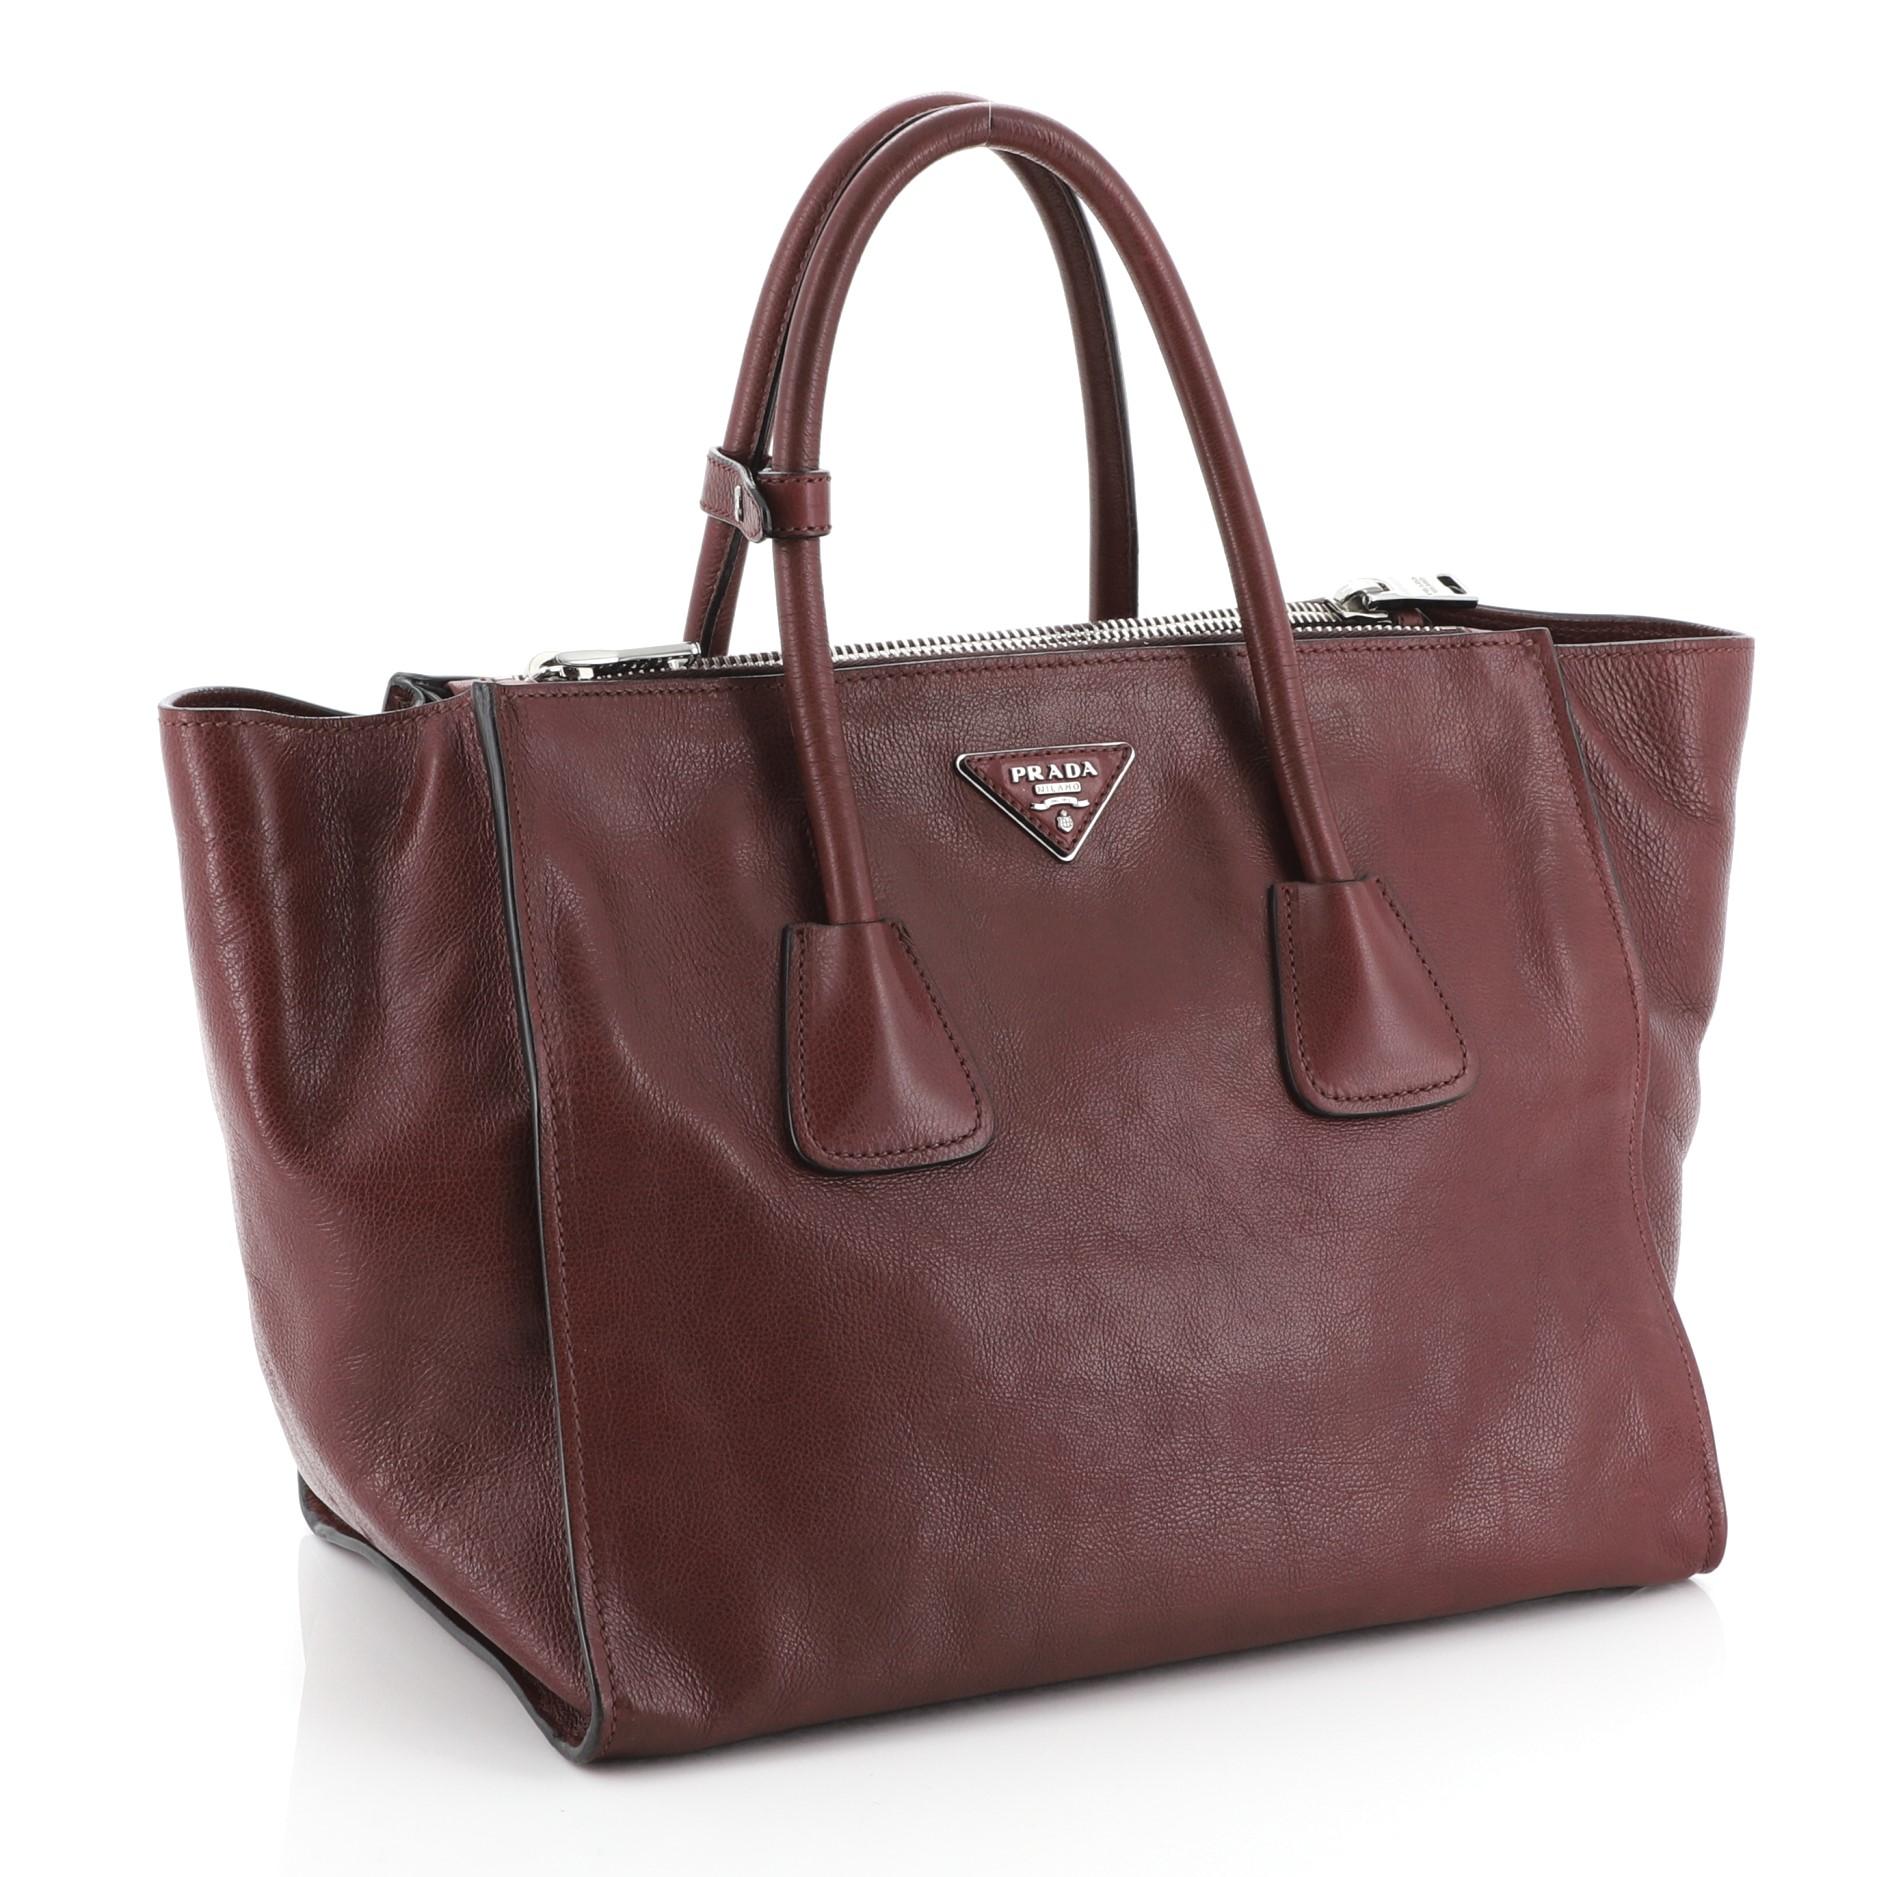 This Prada Twin Pocket Tote Glace Calf Medium, crafted from red glace calf leather, features tall dual rolled top handles, Prada triangle logo, and silver-tone hardware. Its zip closure opens to a black fabric interior with slip pocket. 

Condition: